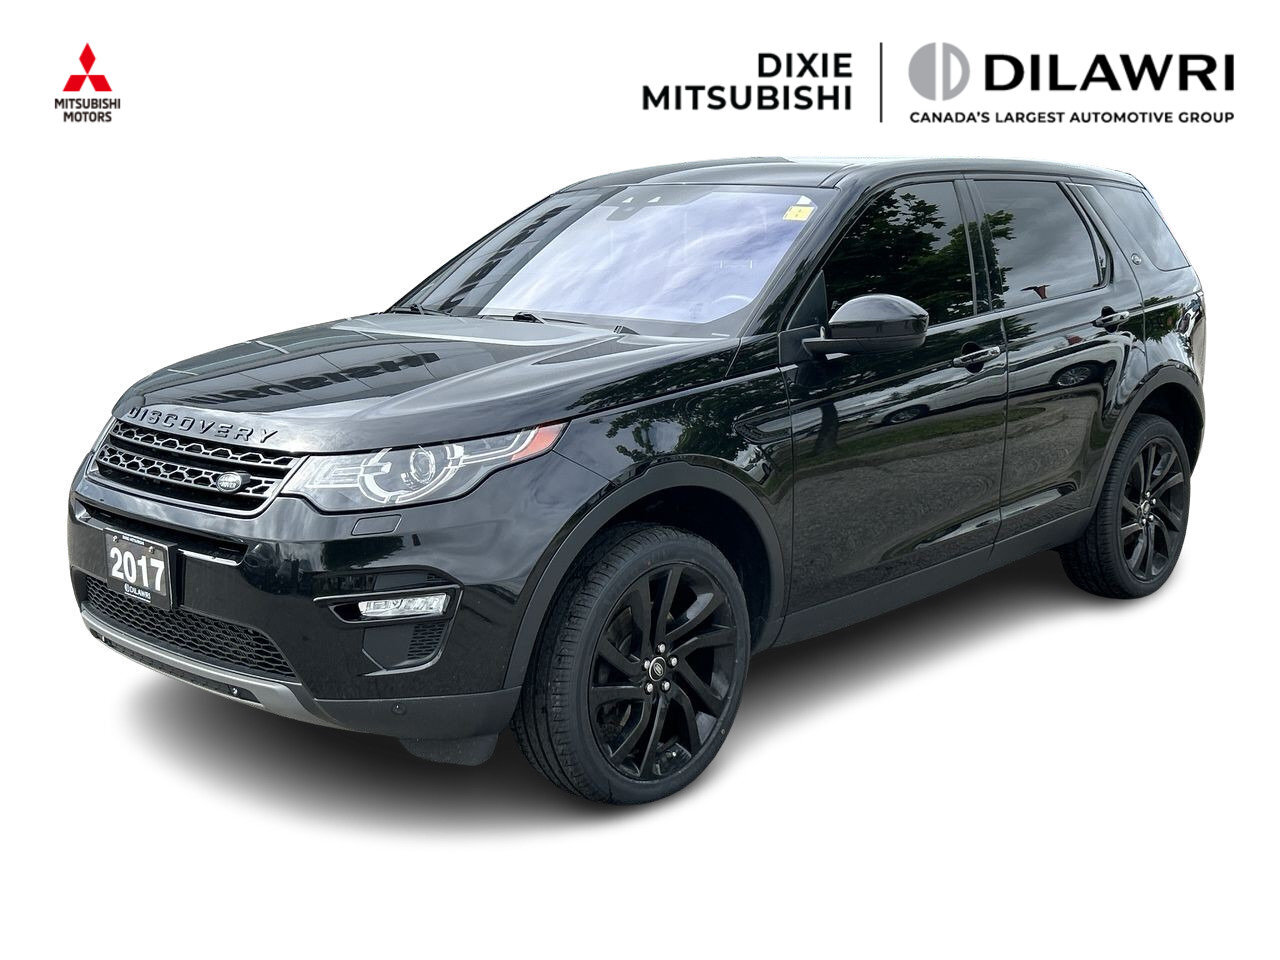 2017 Land Rover Discovery HSE DILAWRI CERTIFIED| MERIDIAN SOUND| BACKUP CAM|